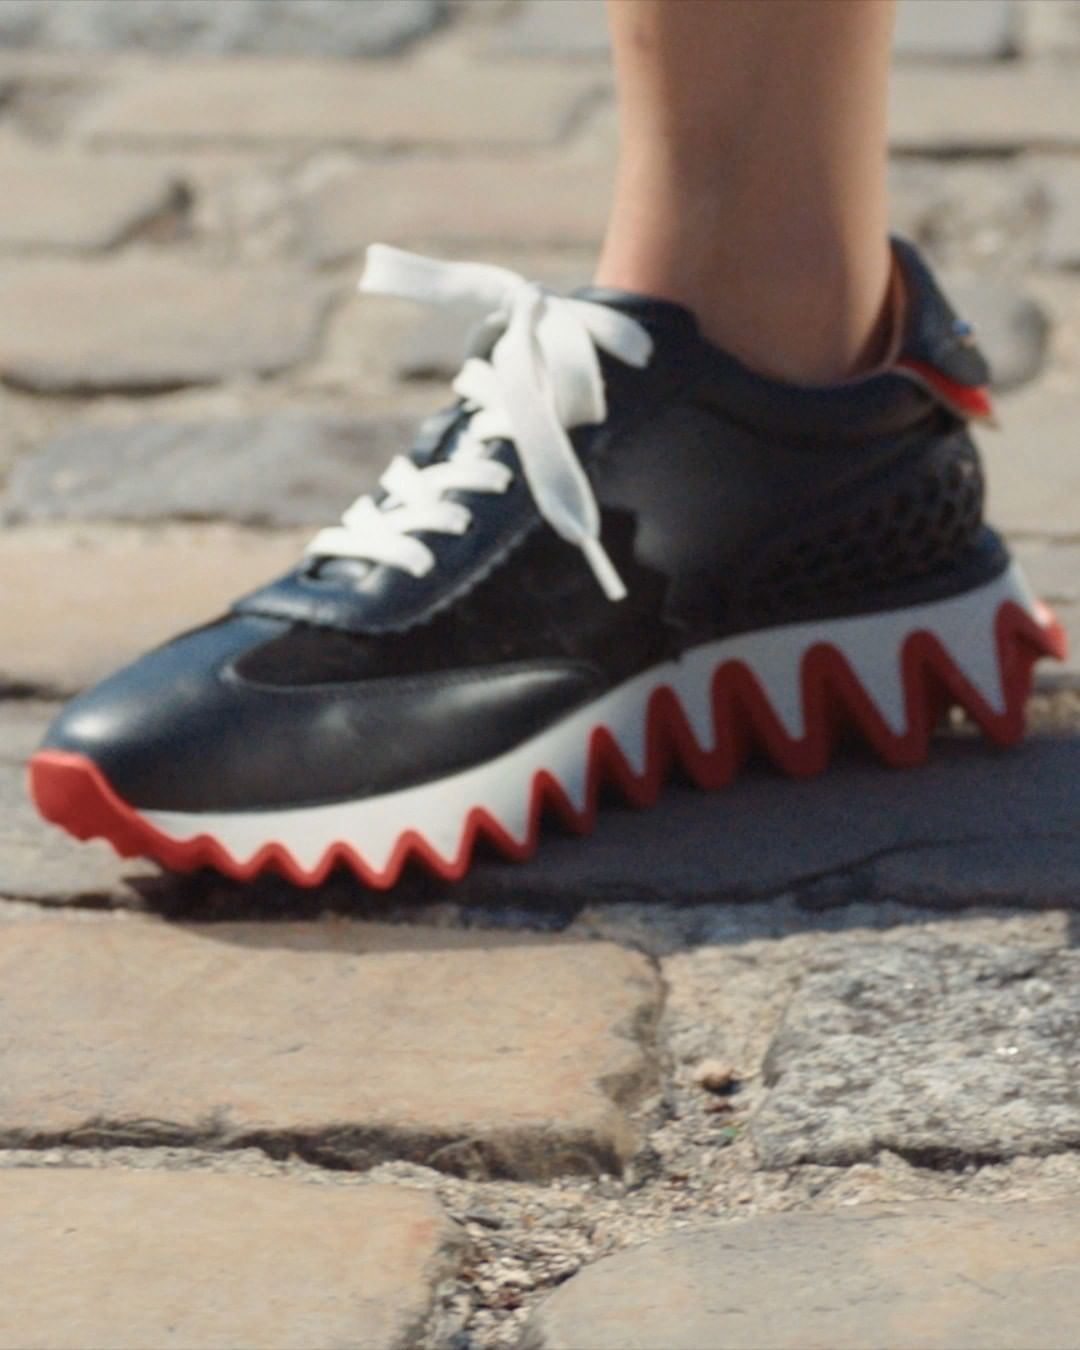 Christian Louboutin - This sneaker got sole: Boost your looks with the #Loubishark's XXL ridges. #ChristianLouboutin
Video by @Felix_Cooper